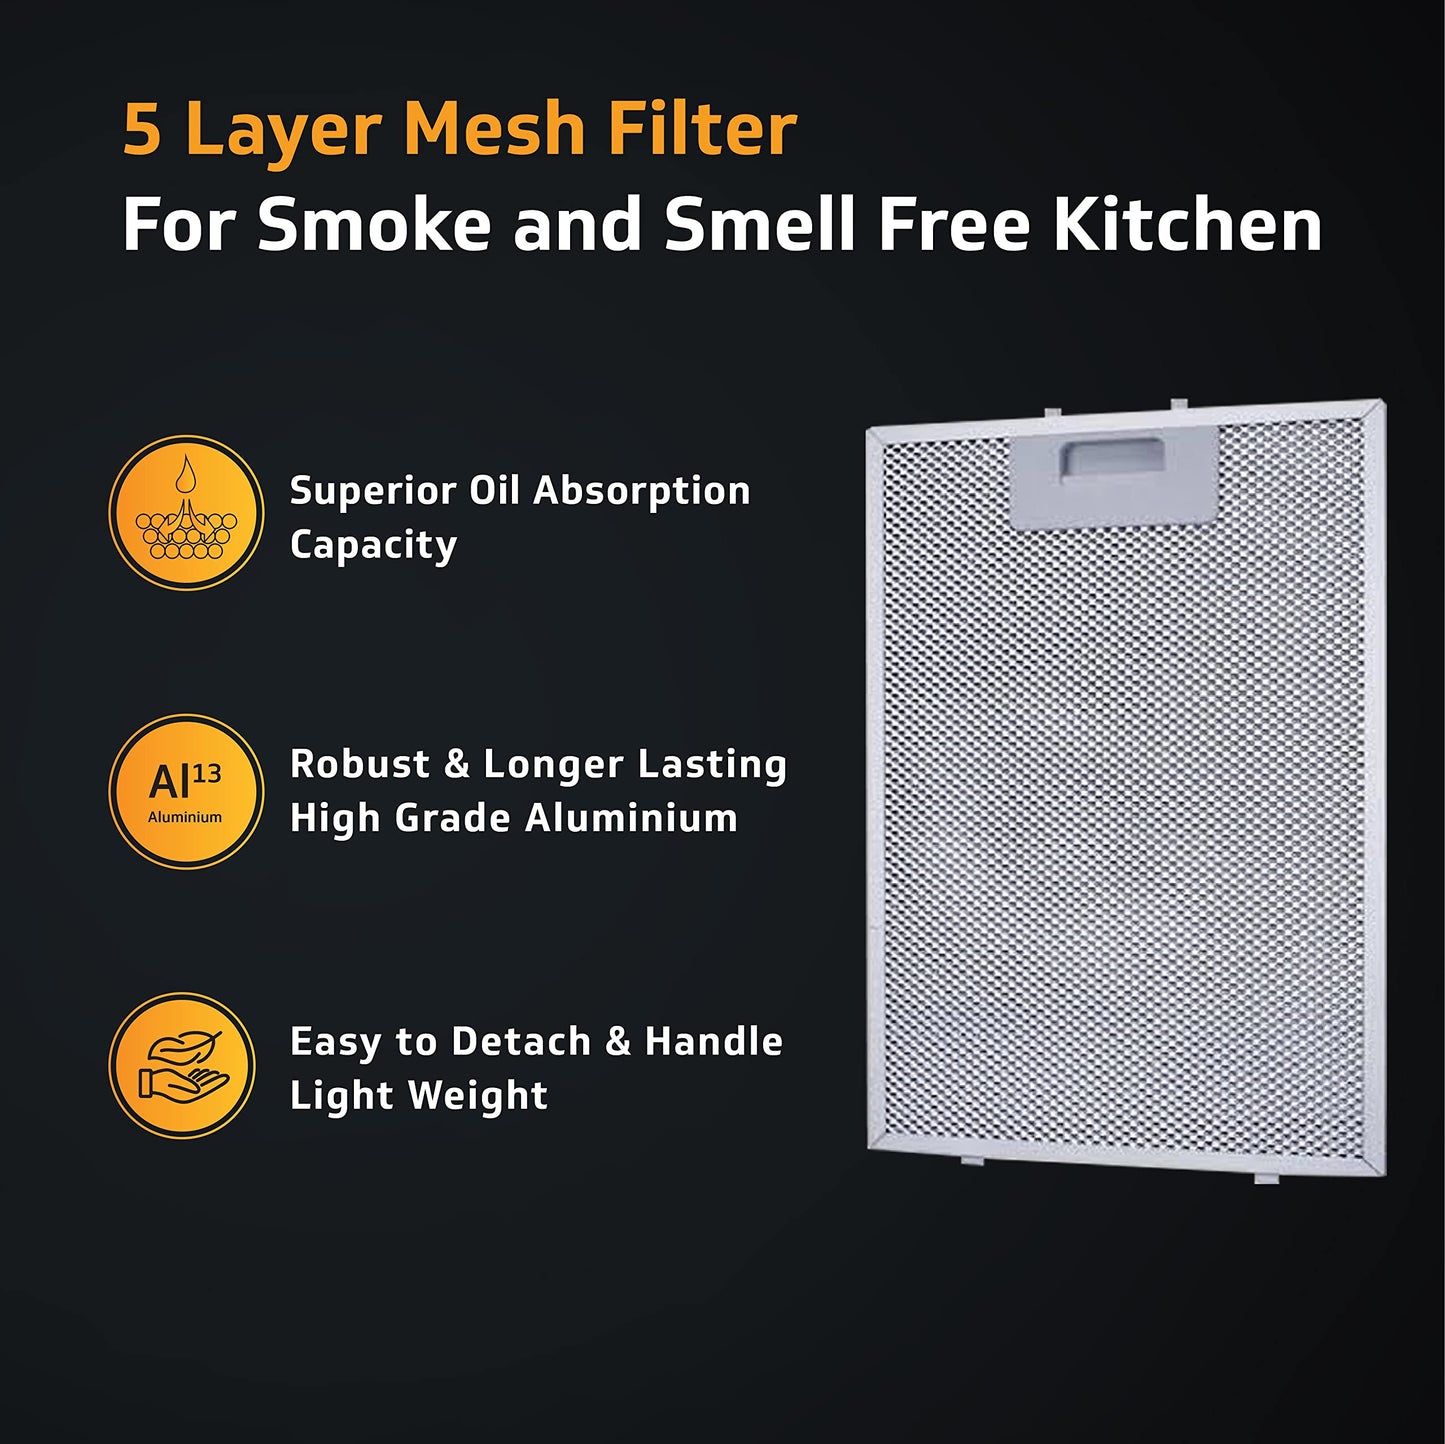 M10 Neo 60cm, 900m³/hr Electric Kitchen Chimney with 5 Layer Aluminium Mesh Filter, Push Button Controls (Stainless Steel)